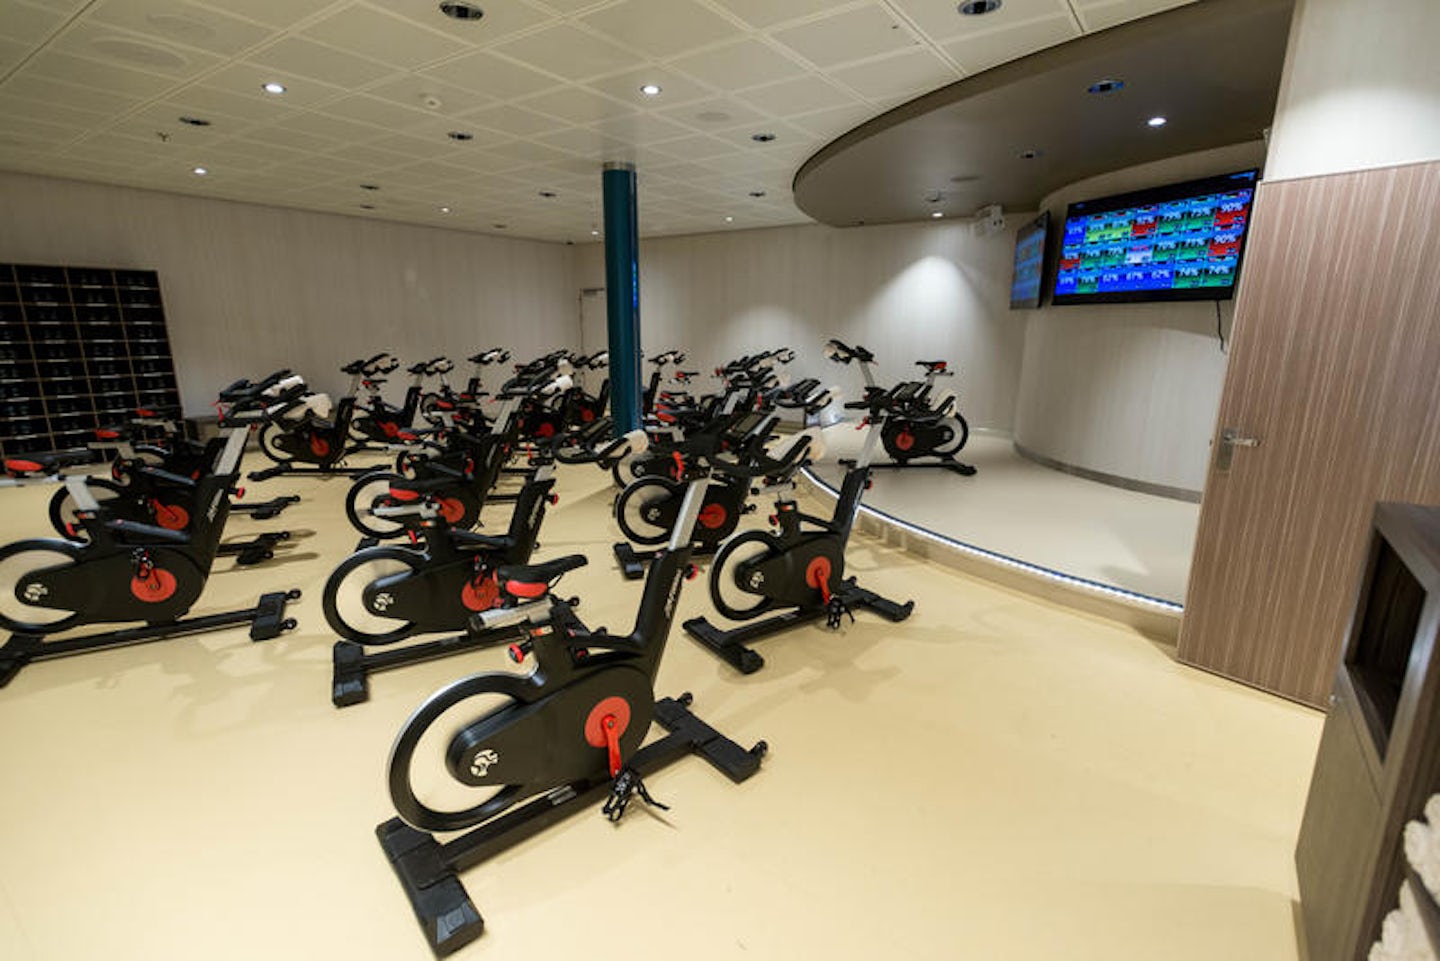 Fitness Center on Symphony of the Seas